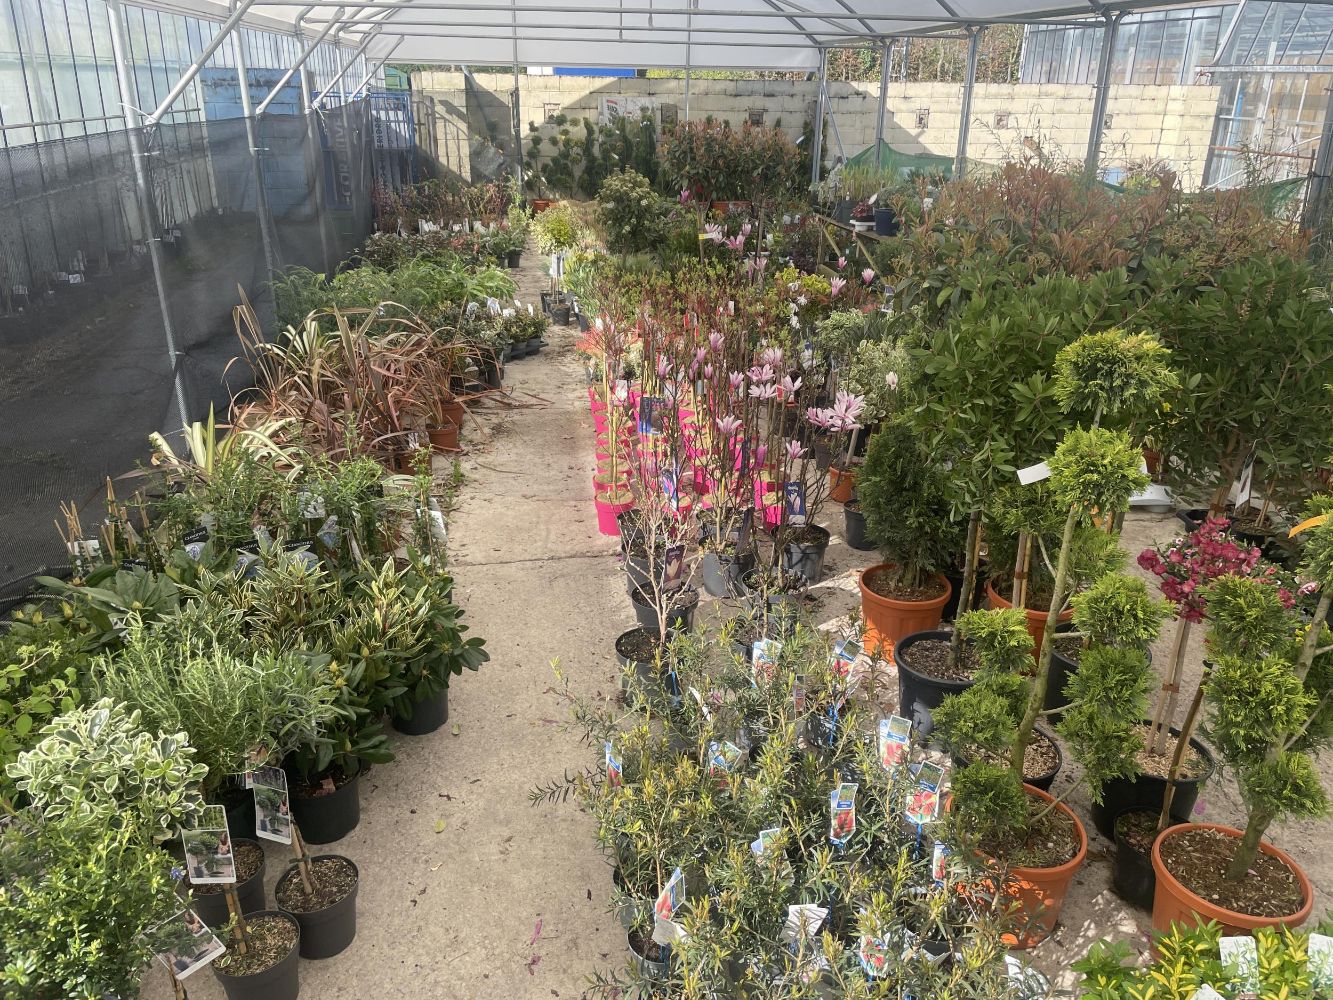 HORTICULTURAL AUCTION - TO INCLUDE PLANTS, SHRUBS, TREES, PERENNIALS, BEDDING PLANTS, GARDEN FURNITURE AND ACCESSORIES FROM 9.30 AM